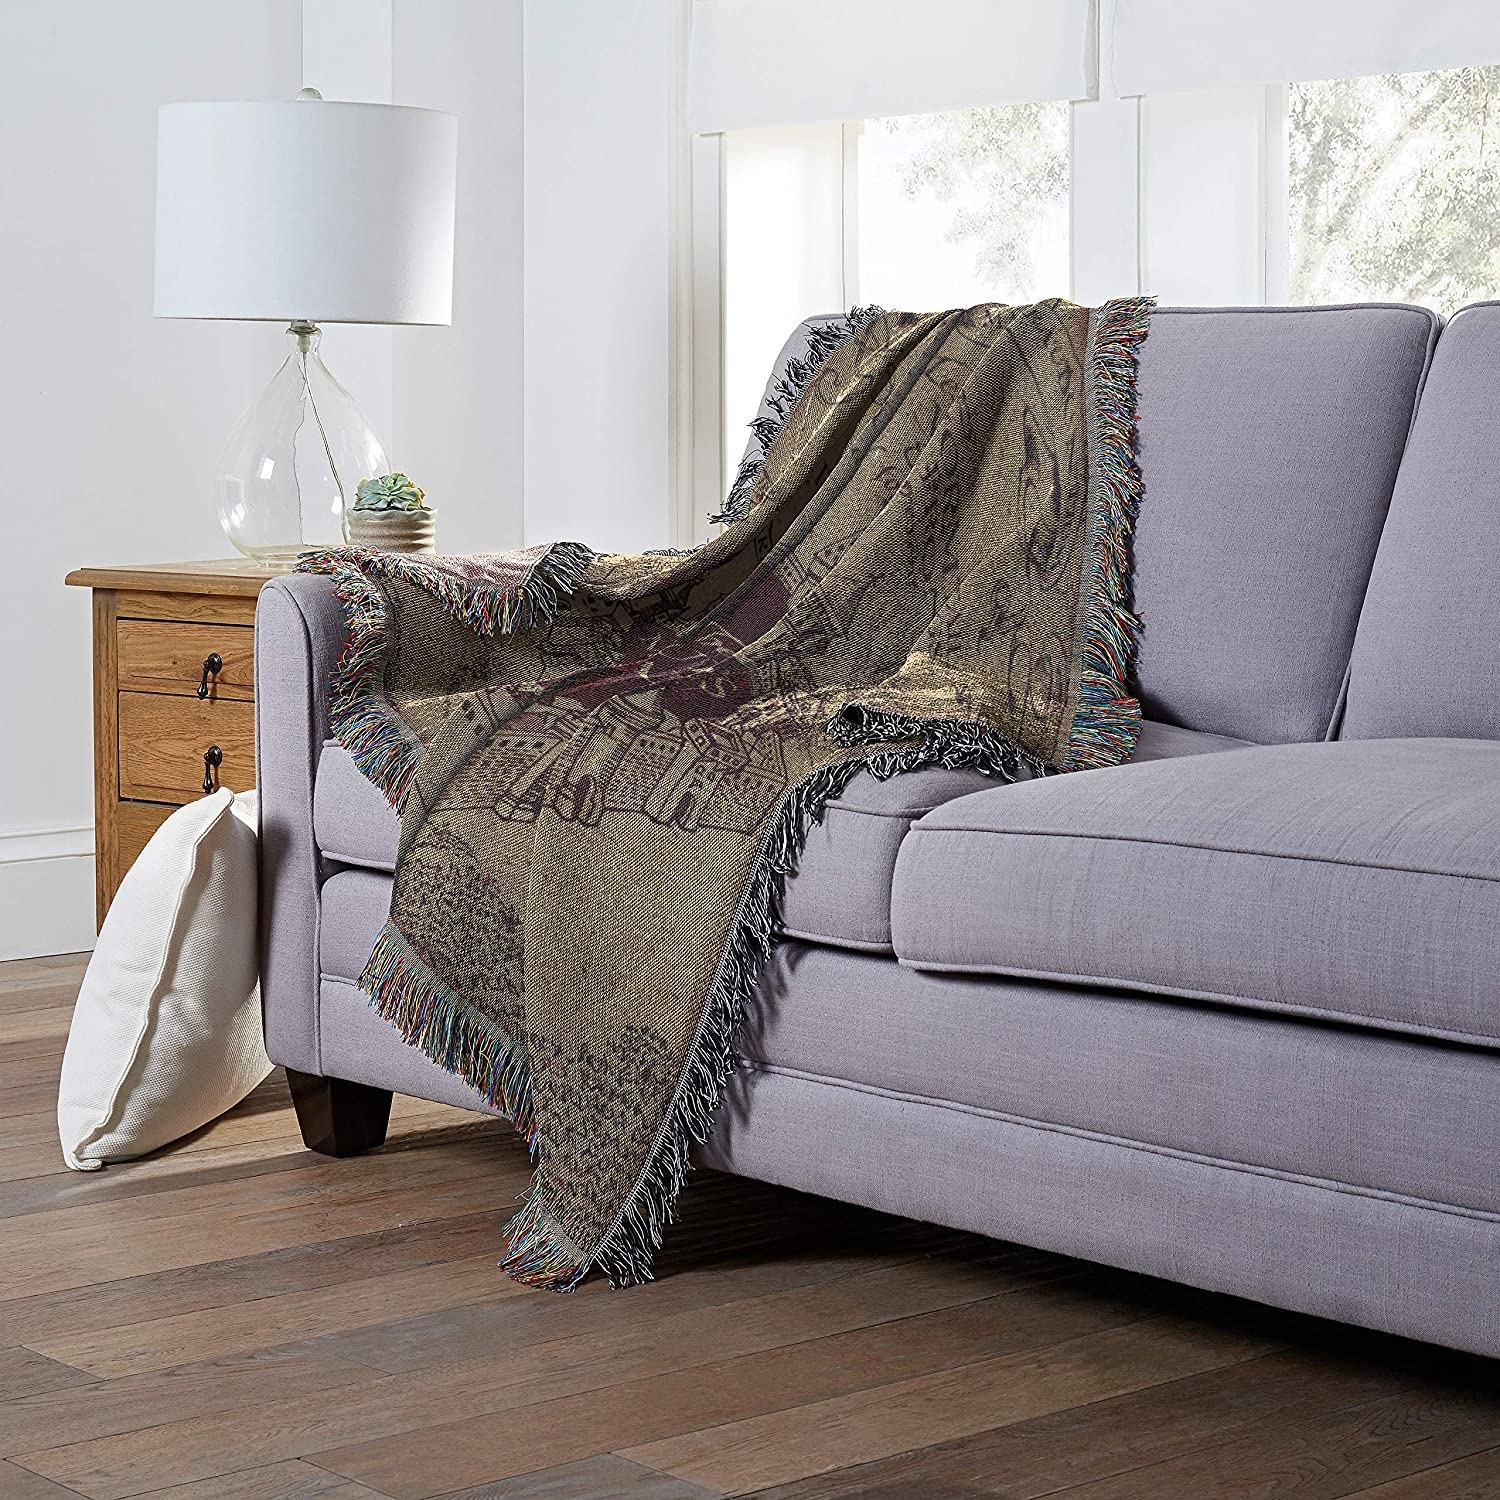 The tapestry blanket thrown over the arm of a couch in a trendy living room